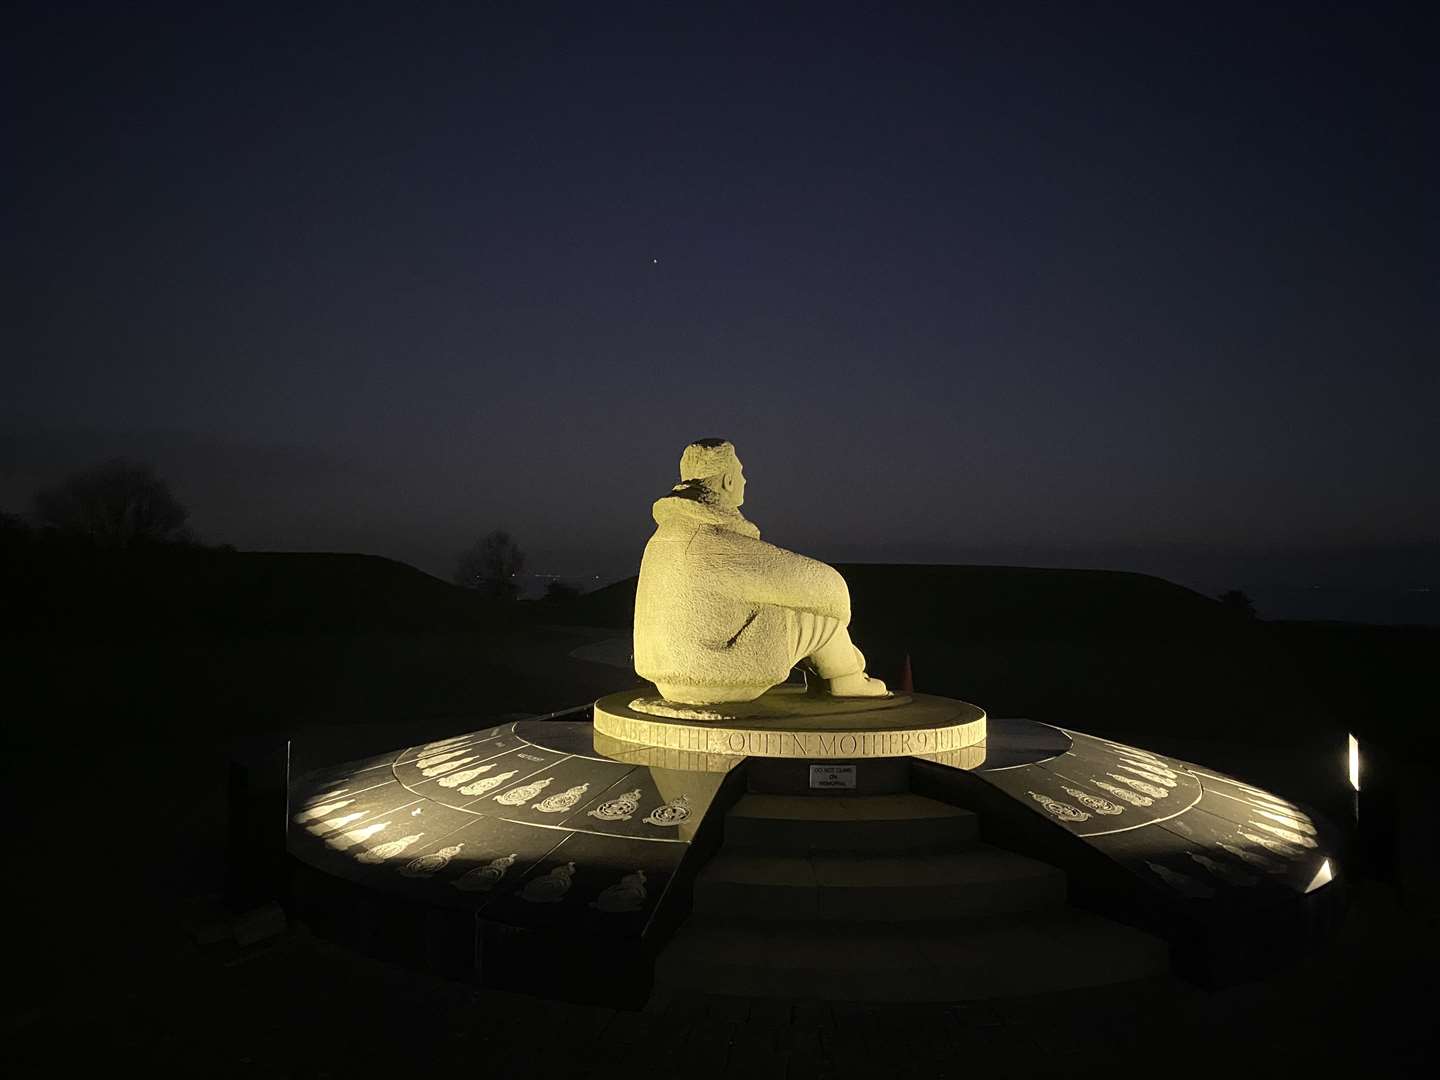 The National Memorial to the Few is now lit by floodlights at dusk